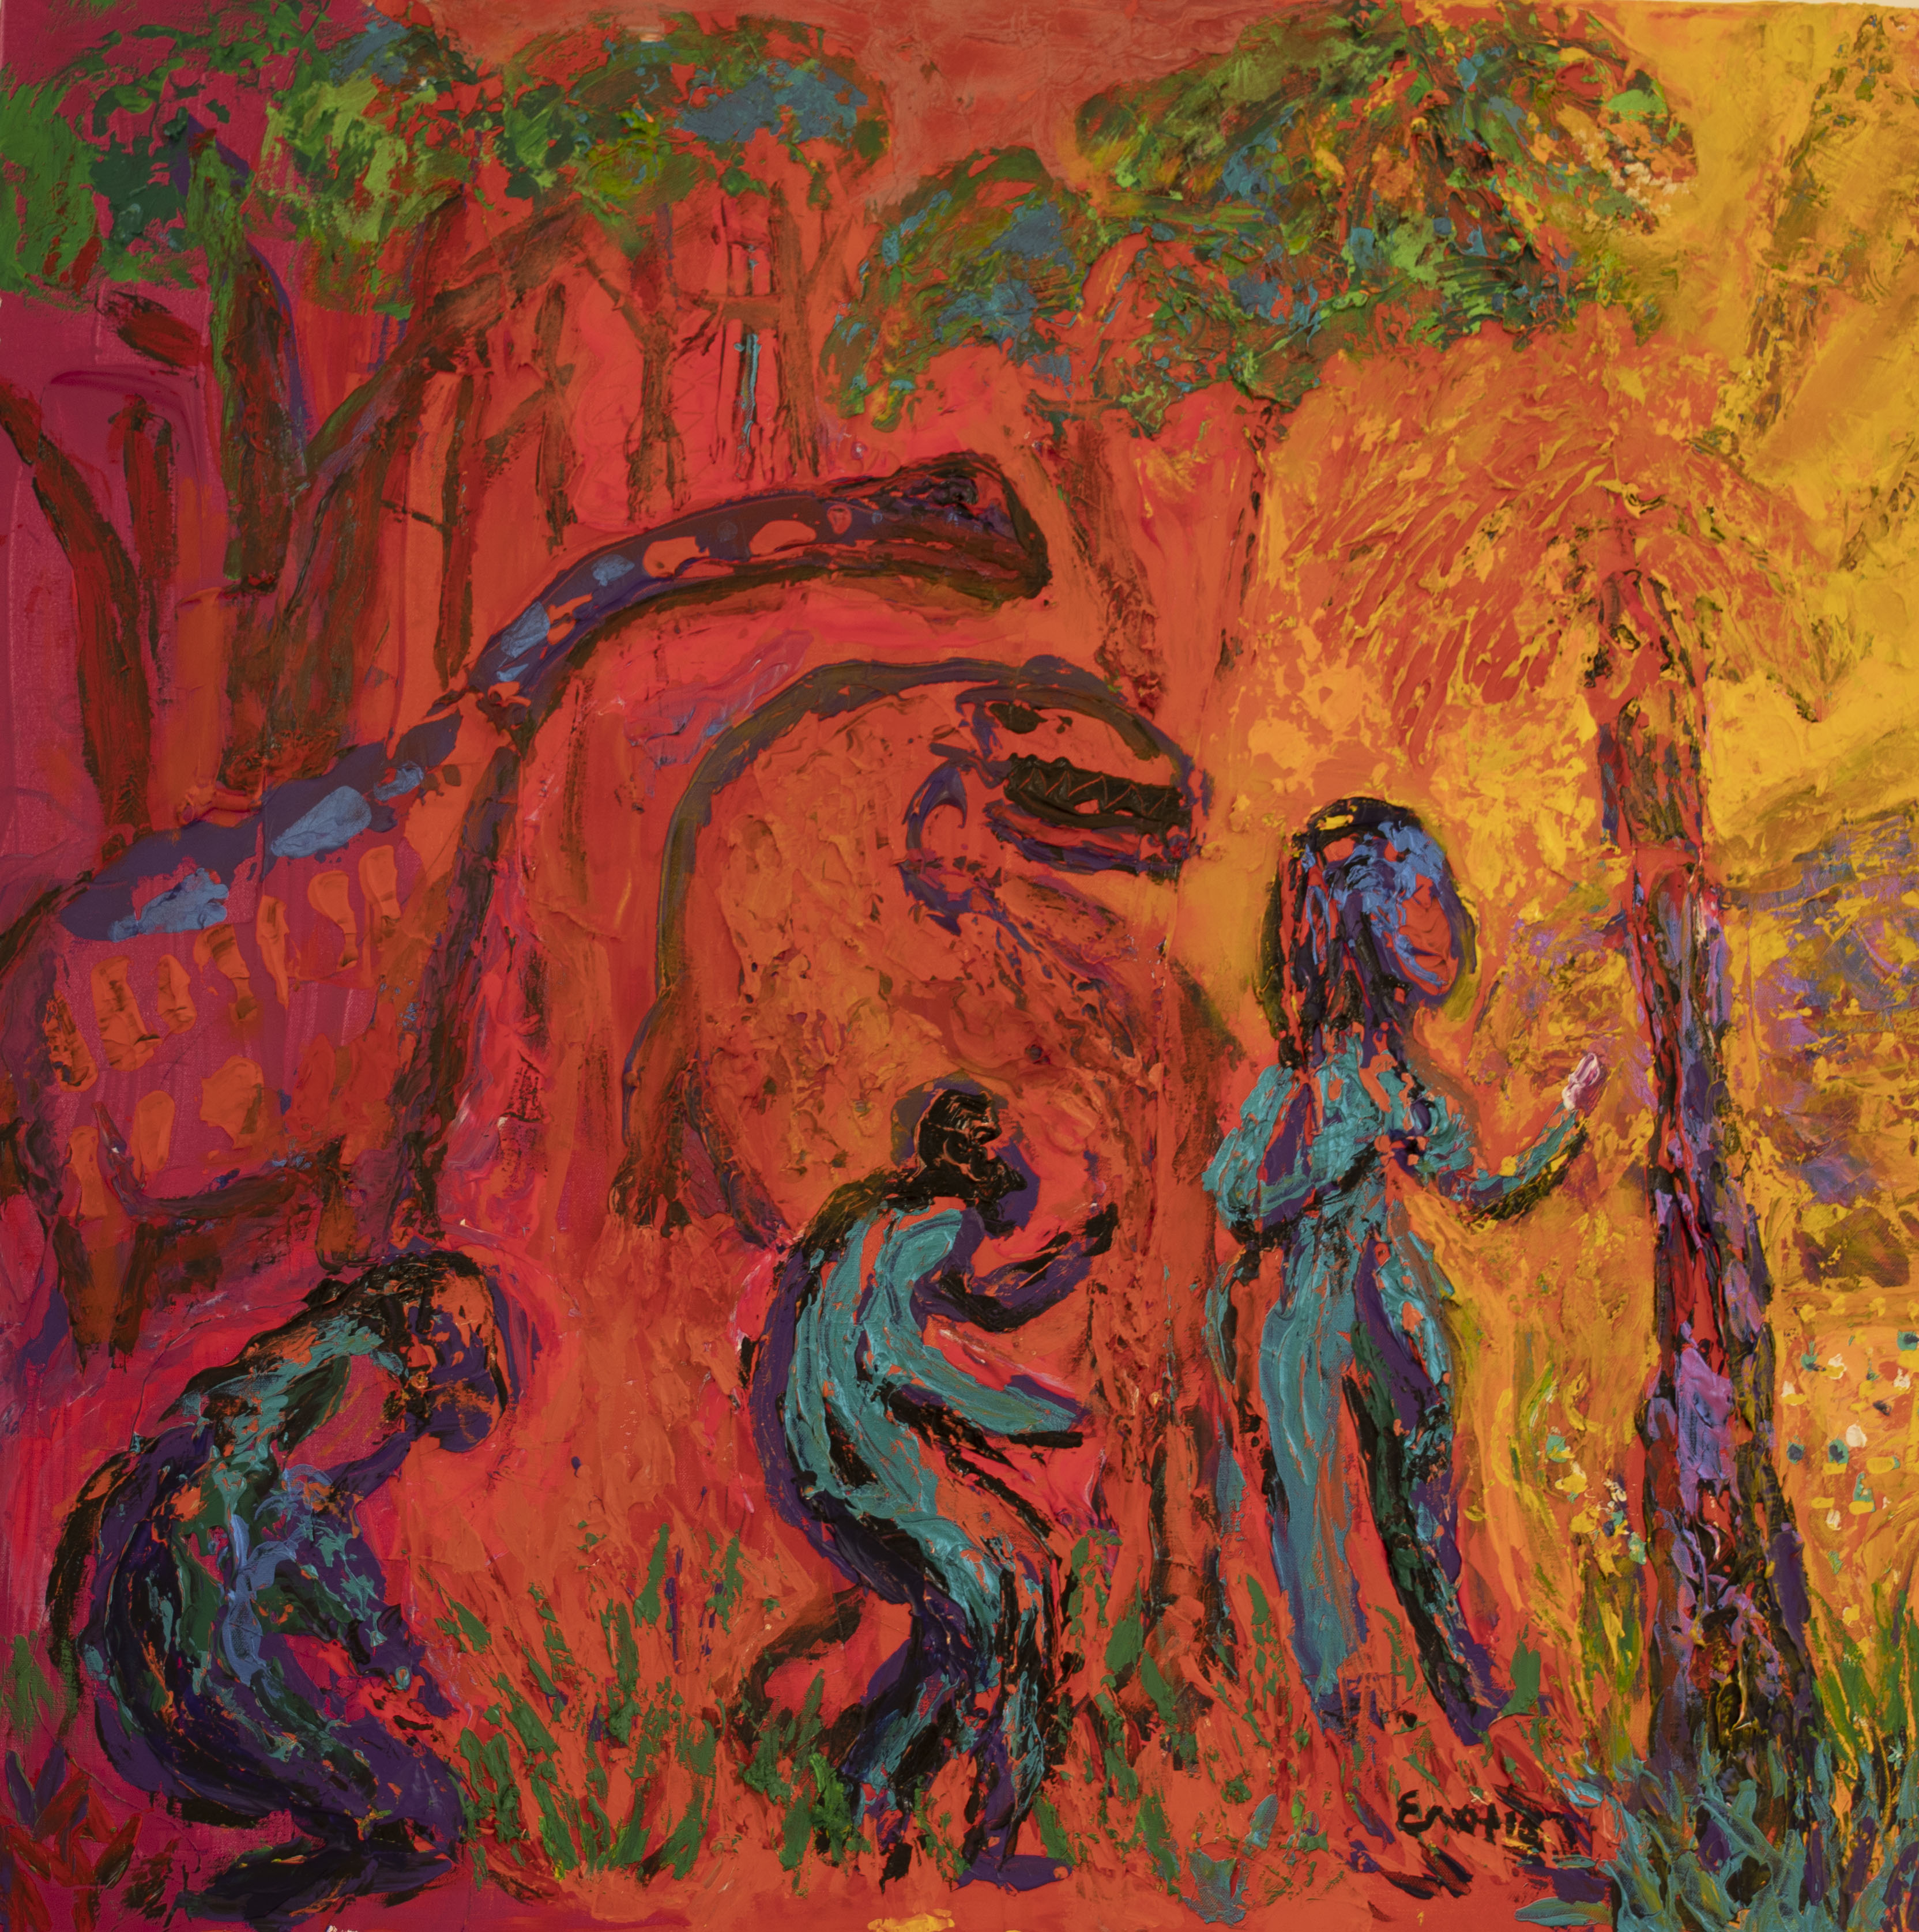 The image features three dinosaur and man's evolution from a crouching ape to a woman holding a mobile phone.